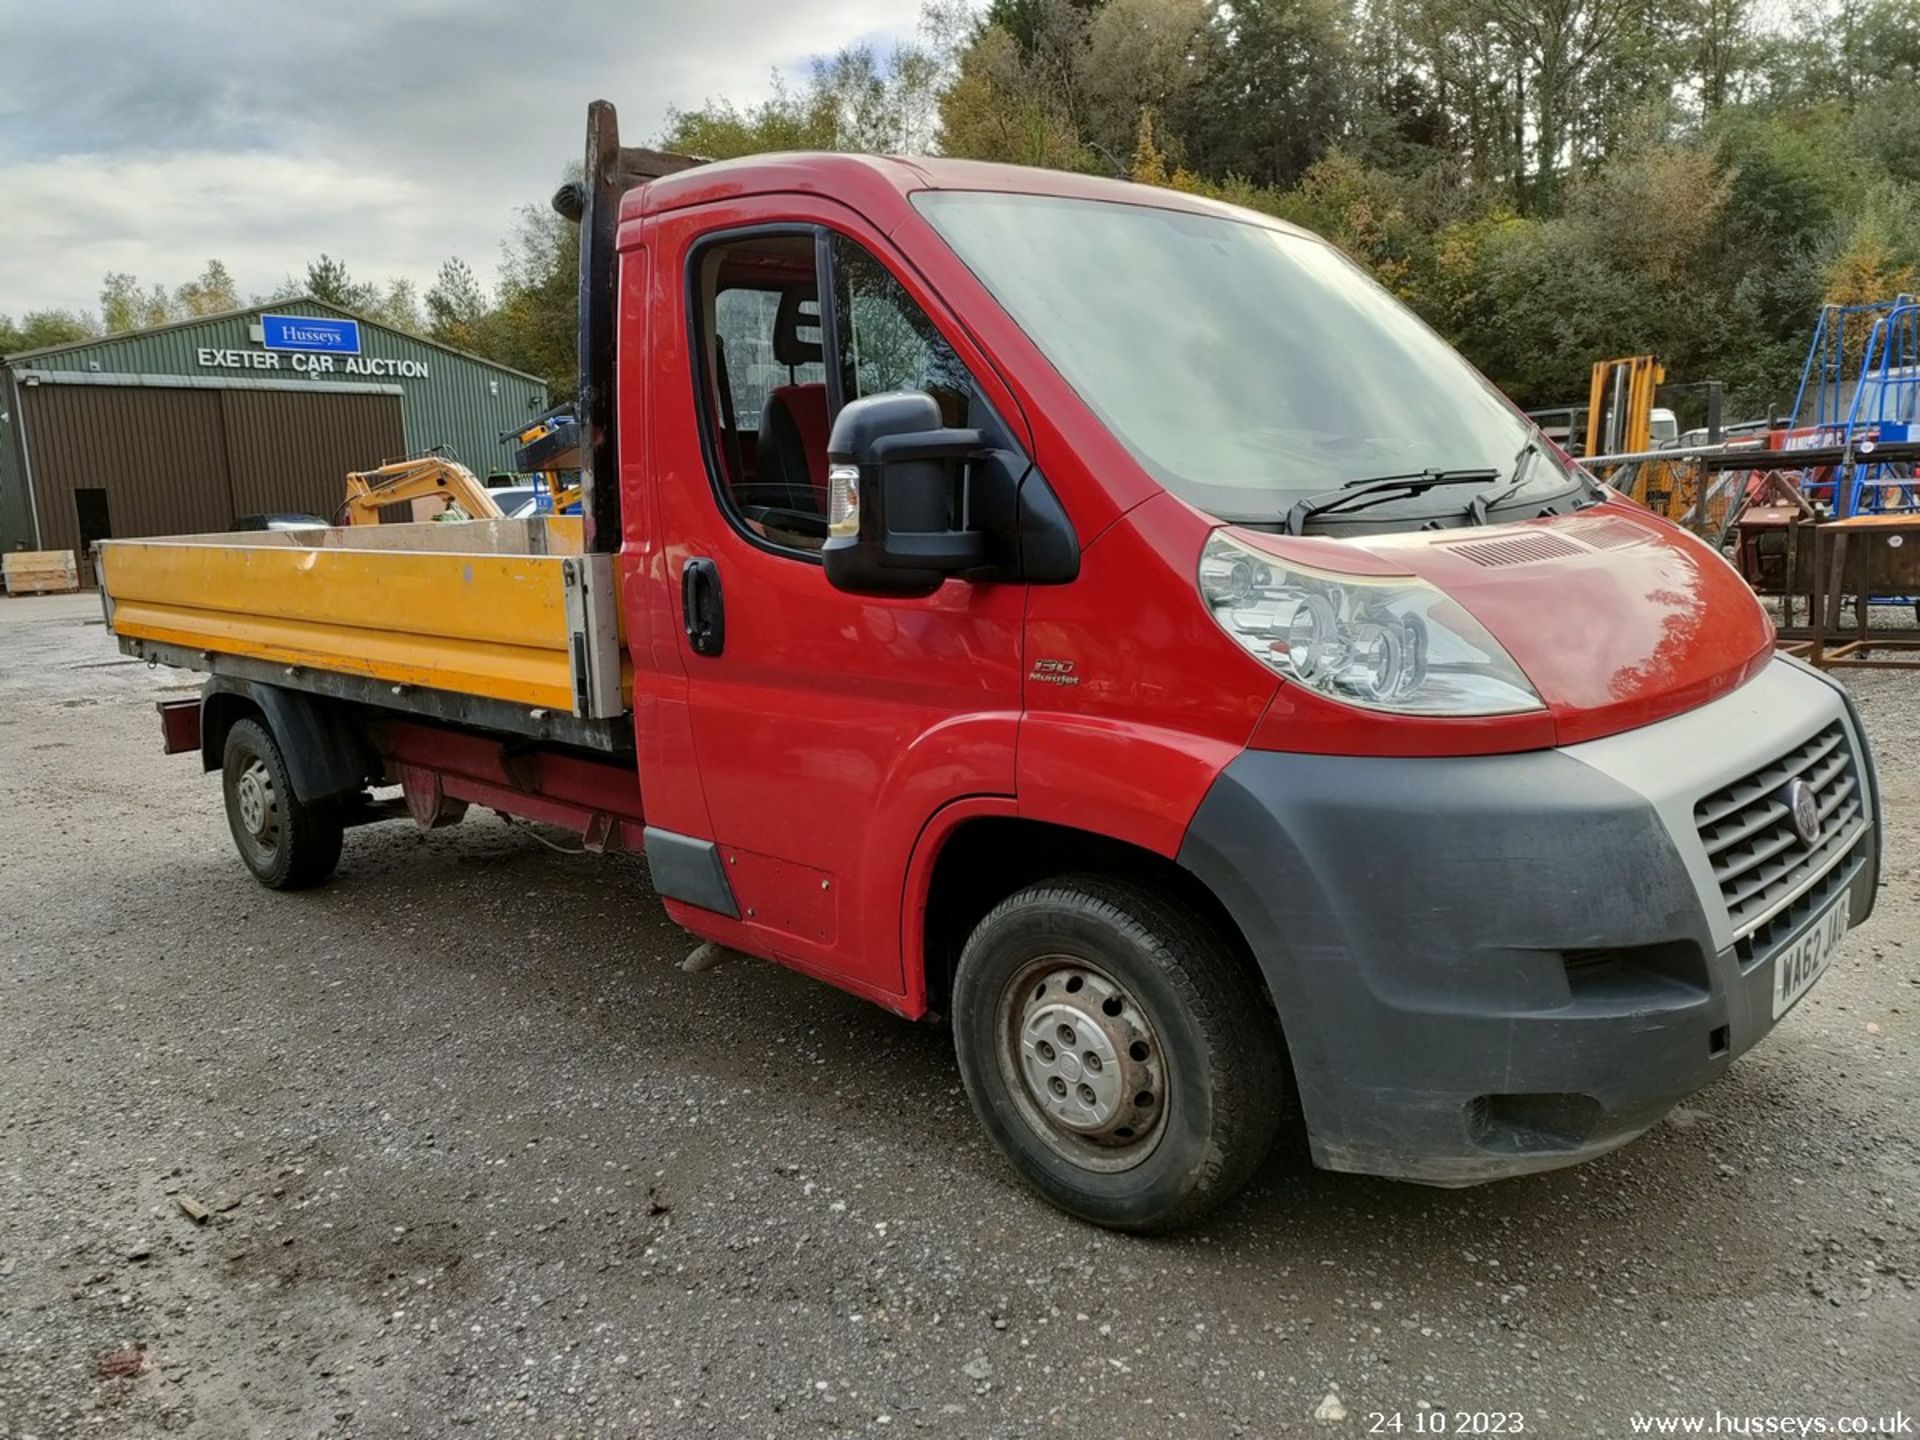 12/62 FIAT DUCATO 35 MULTIJET - 2287cc 2dr Flat Bed (Red, 134k) - Image 2 of 29